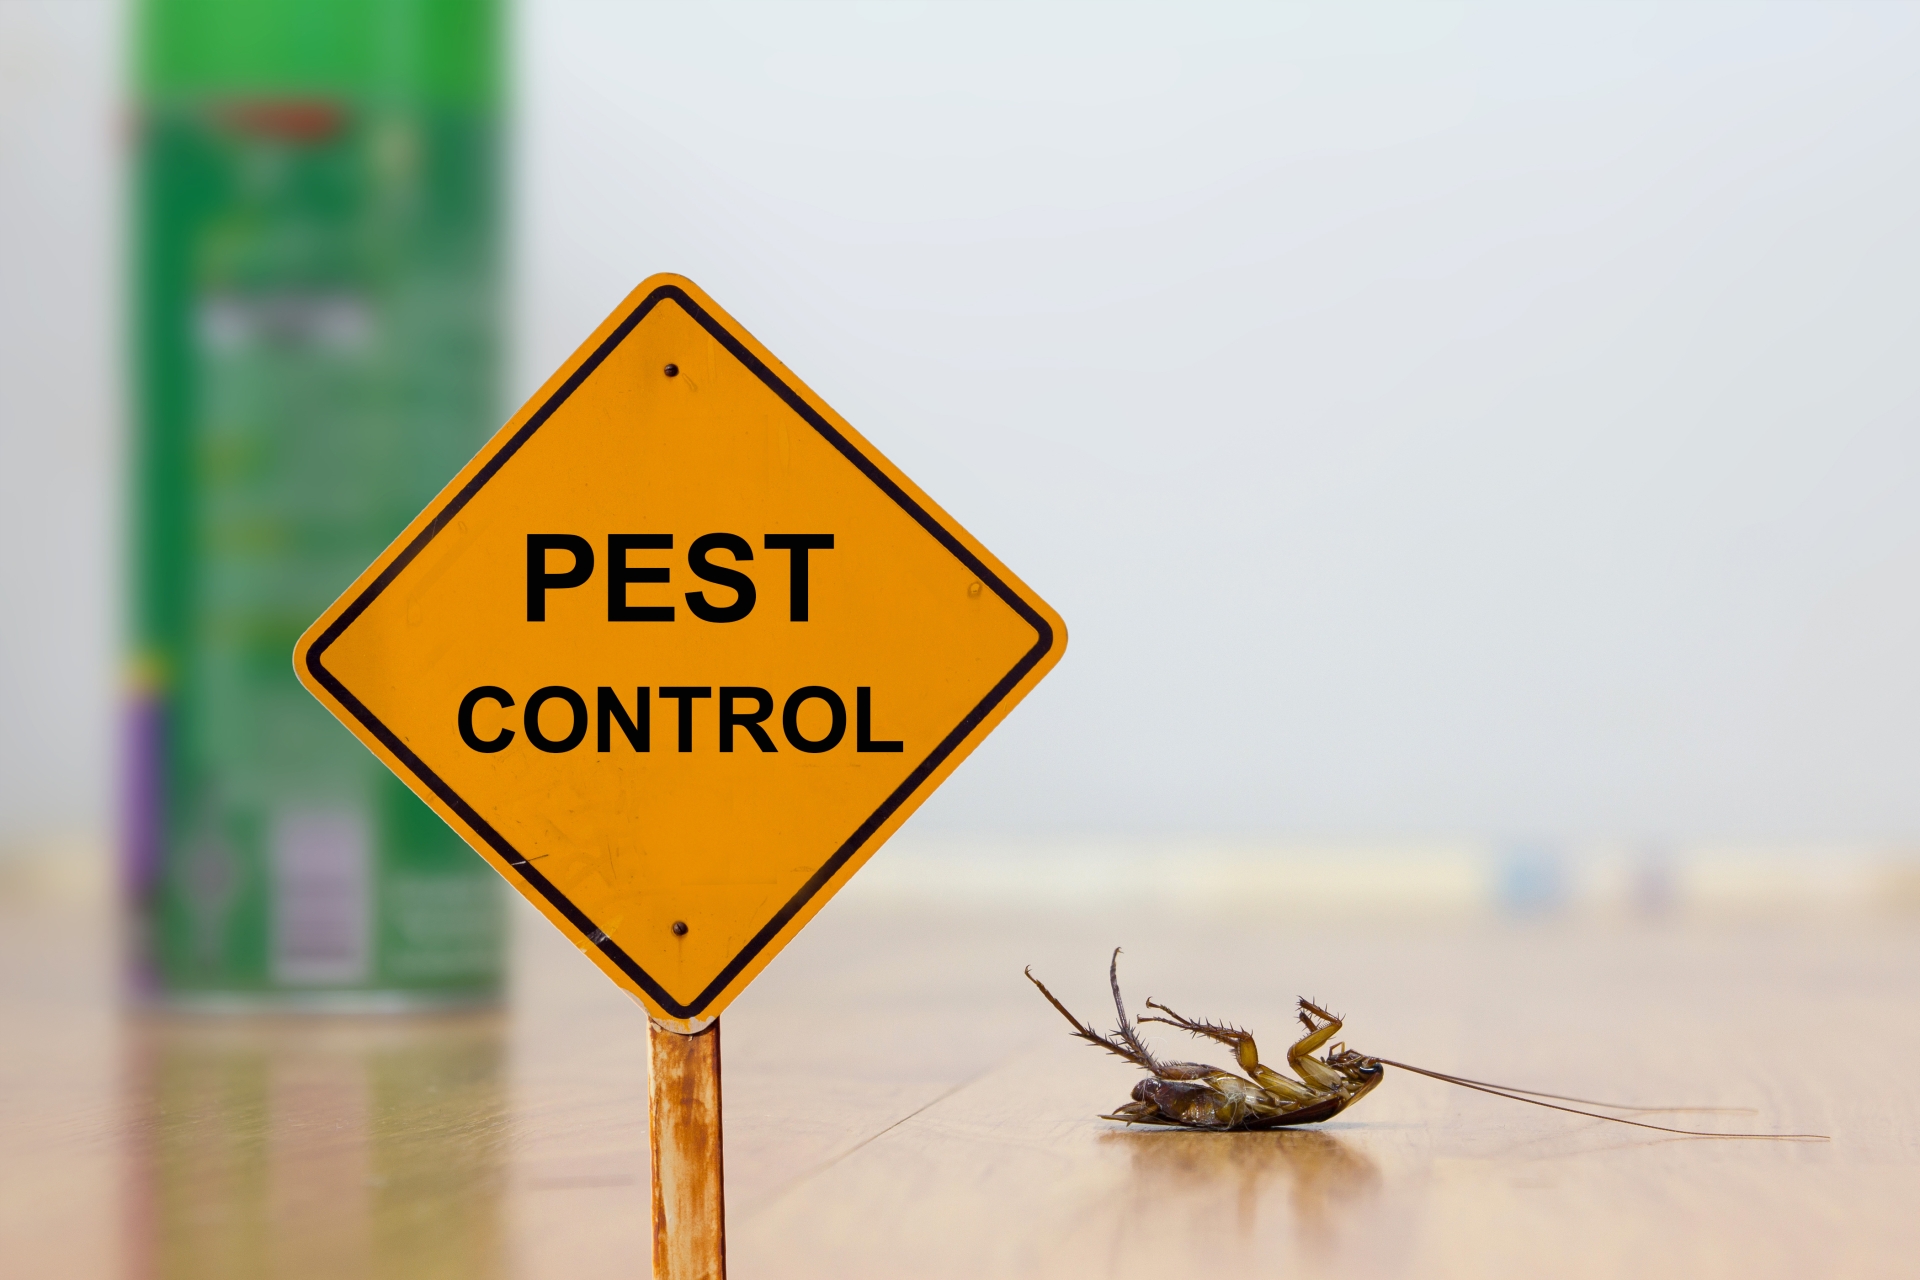 24 Hour Pest Control, Pest Control in Stanmore, Queensbury, HA7. Call Now 020 8166 9746